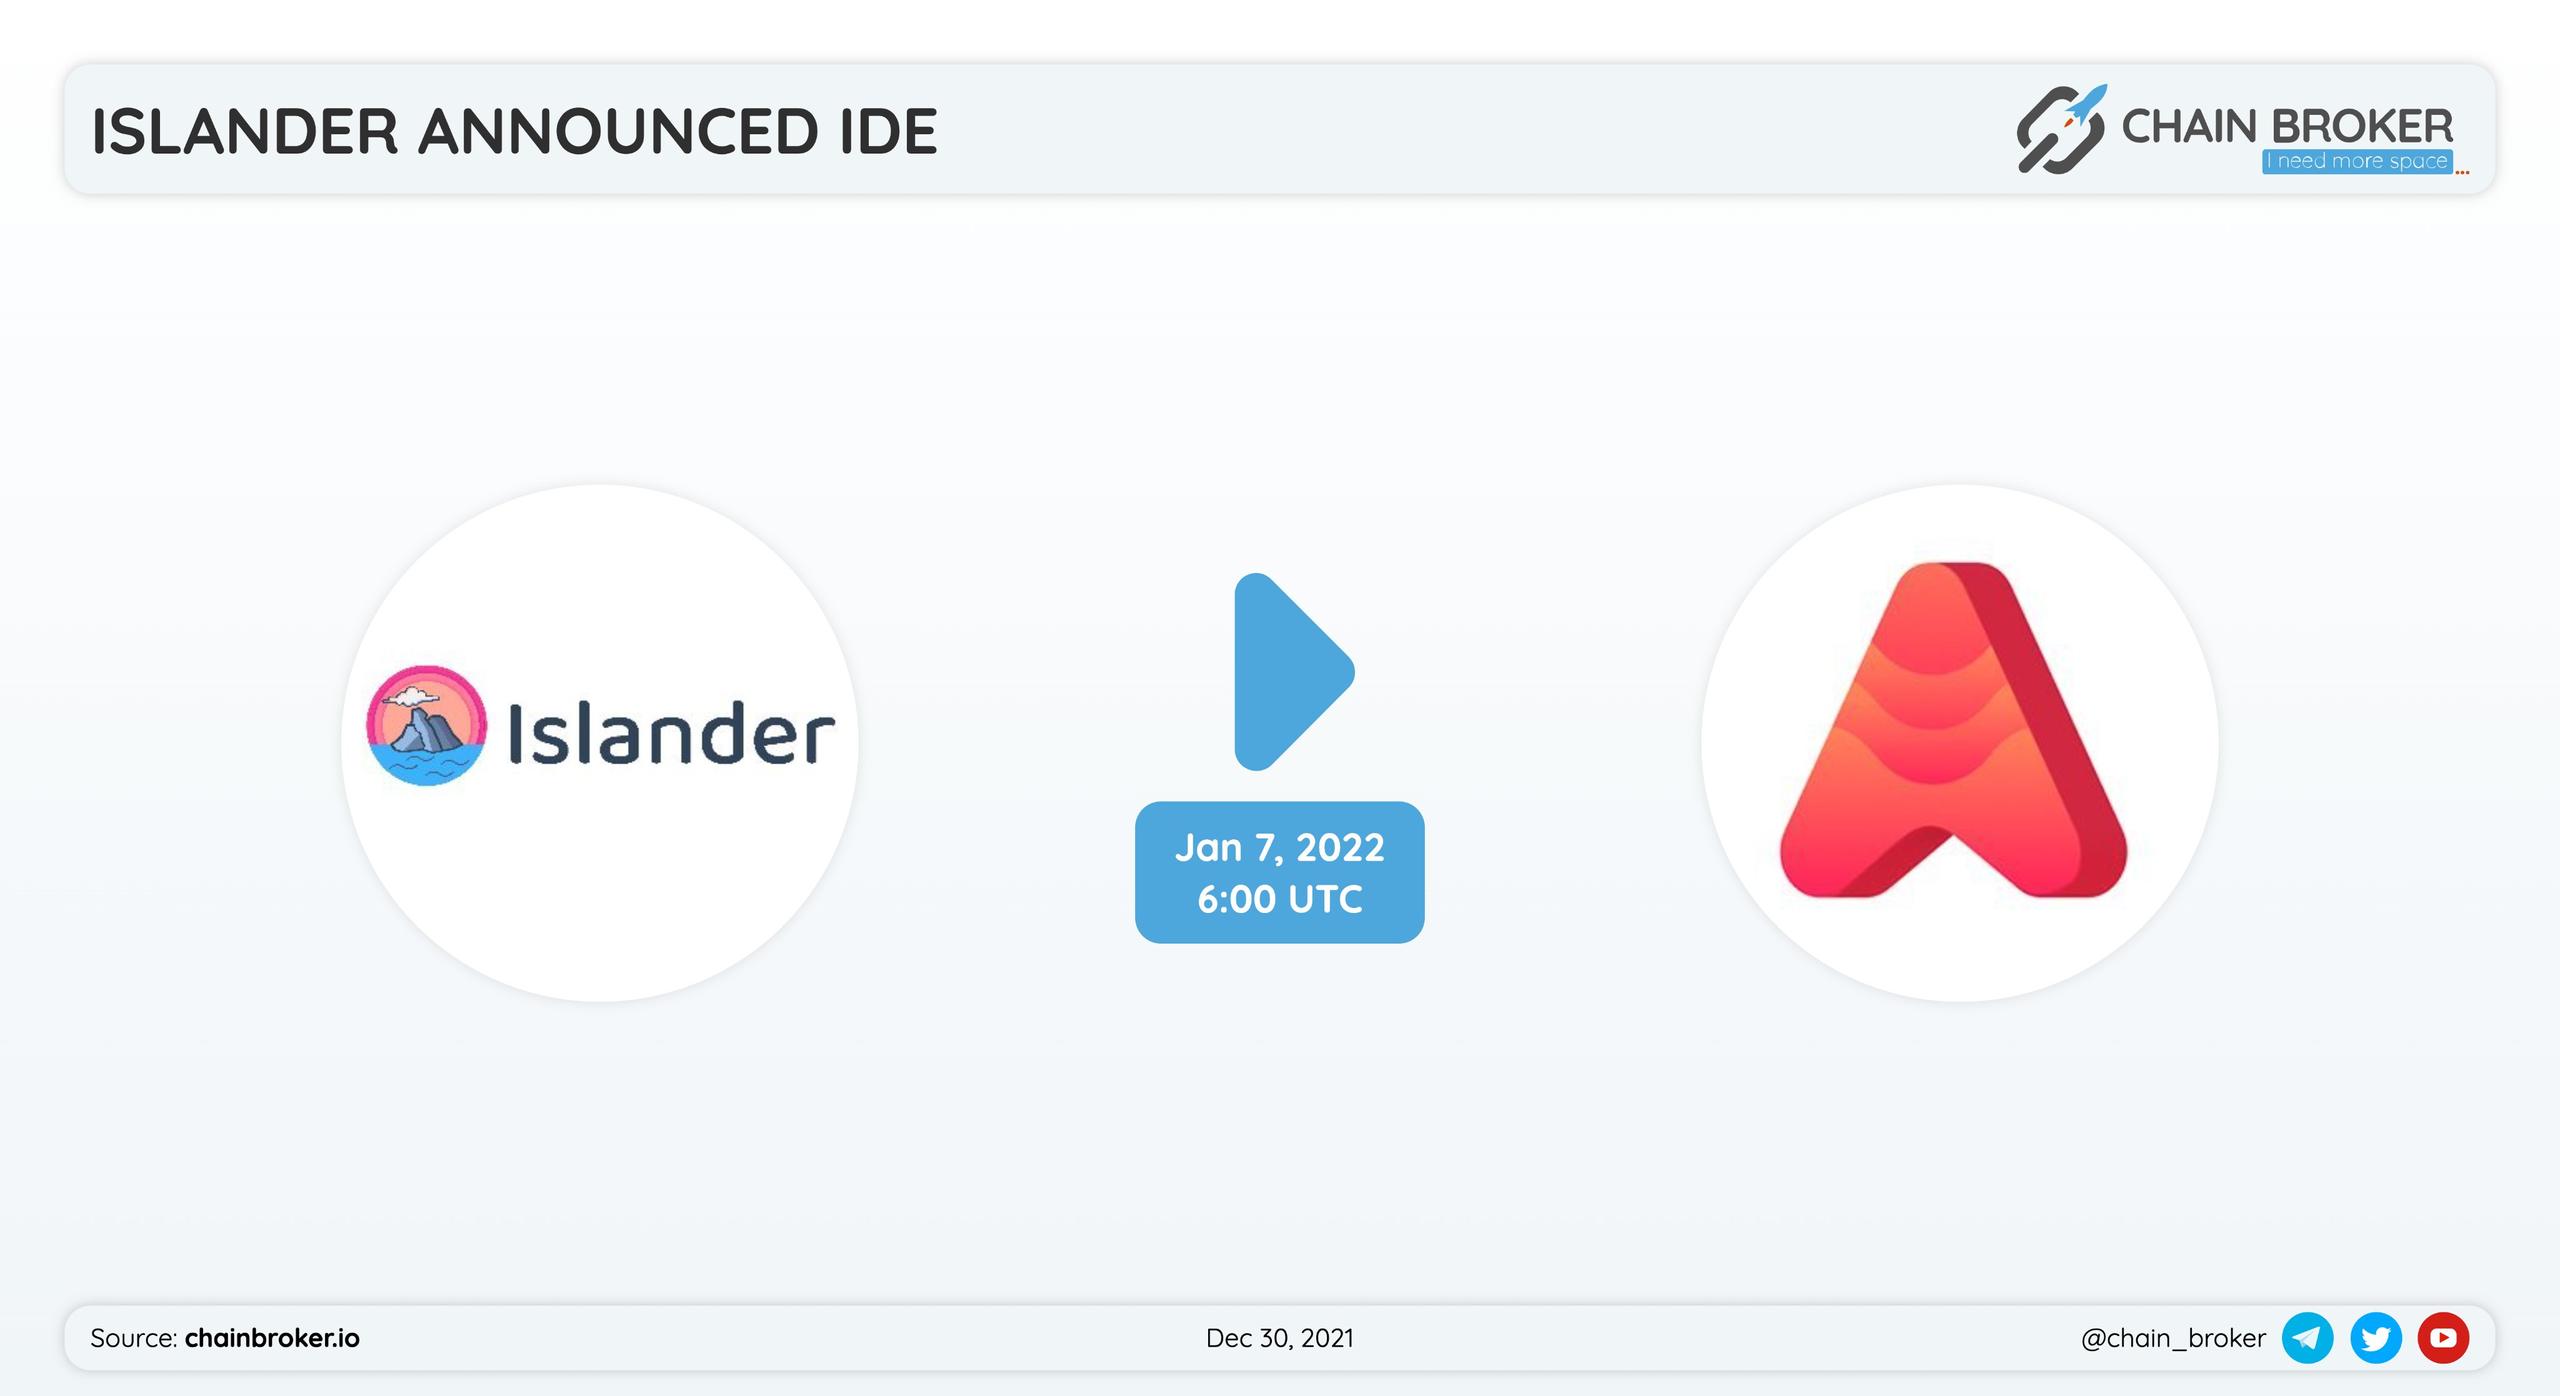 Islander has partnered with Avalaunch for Initial Distribution Event (IDE).